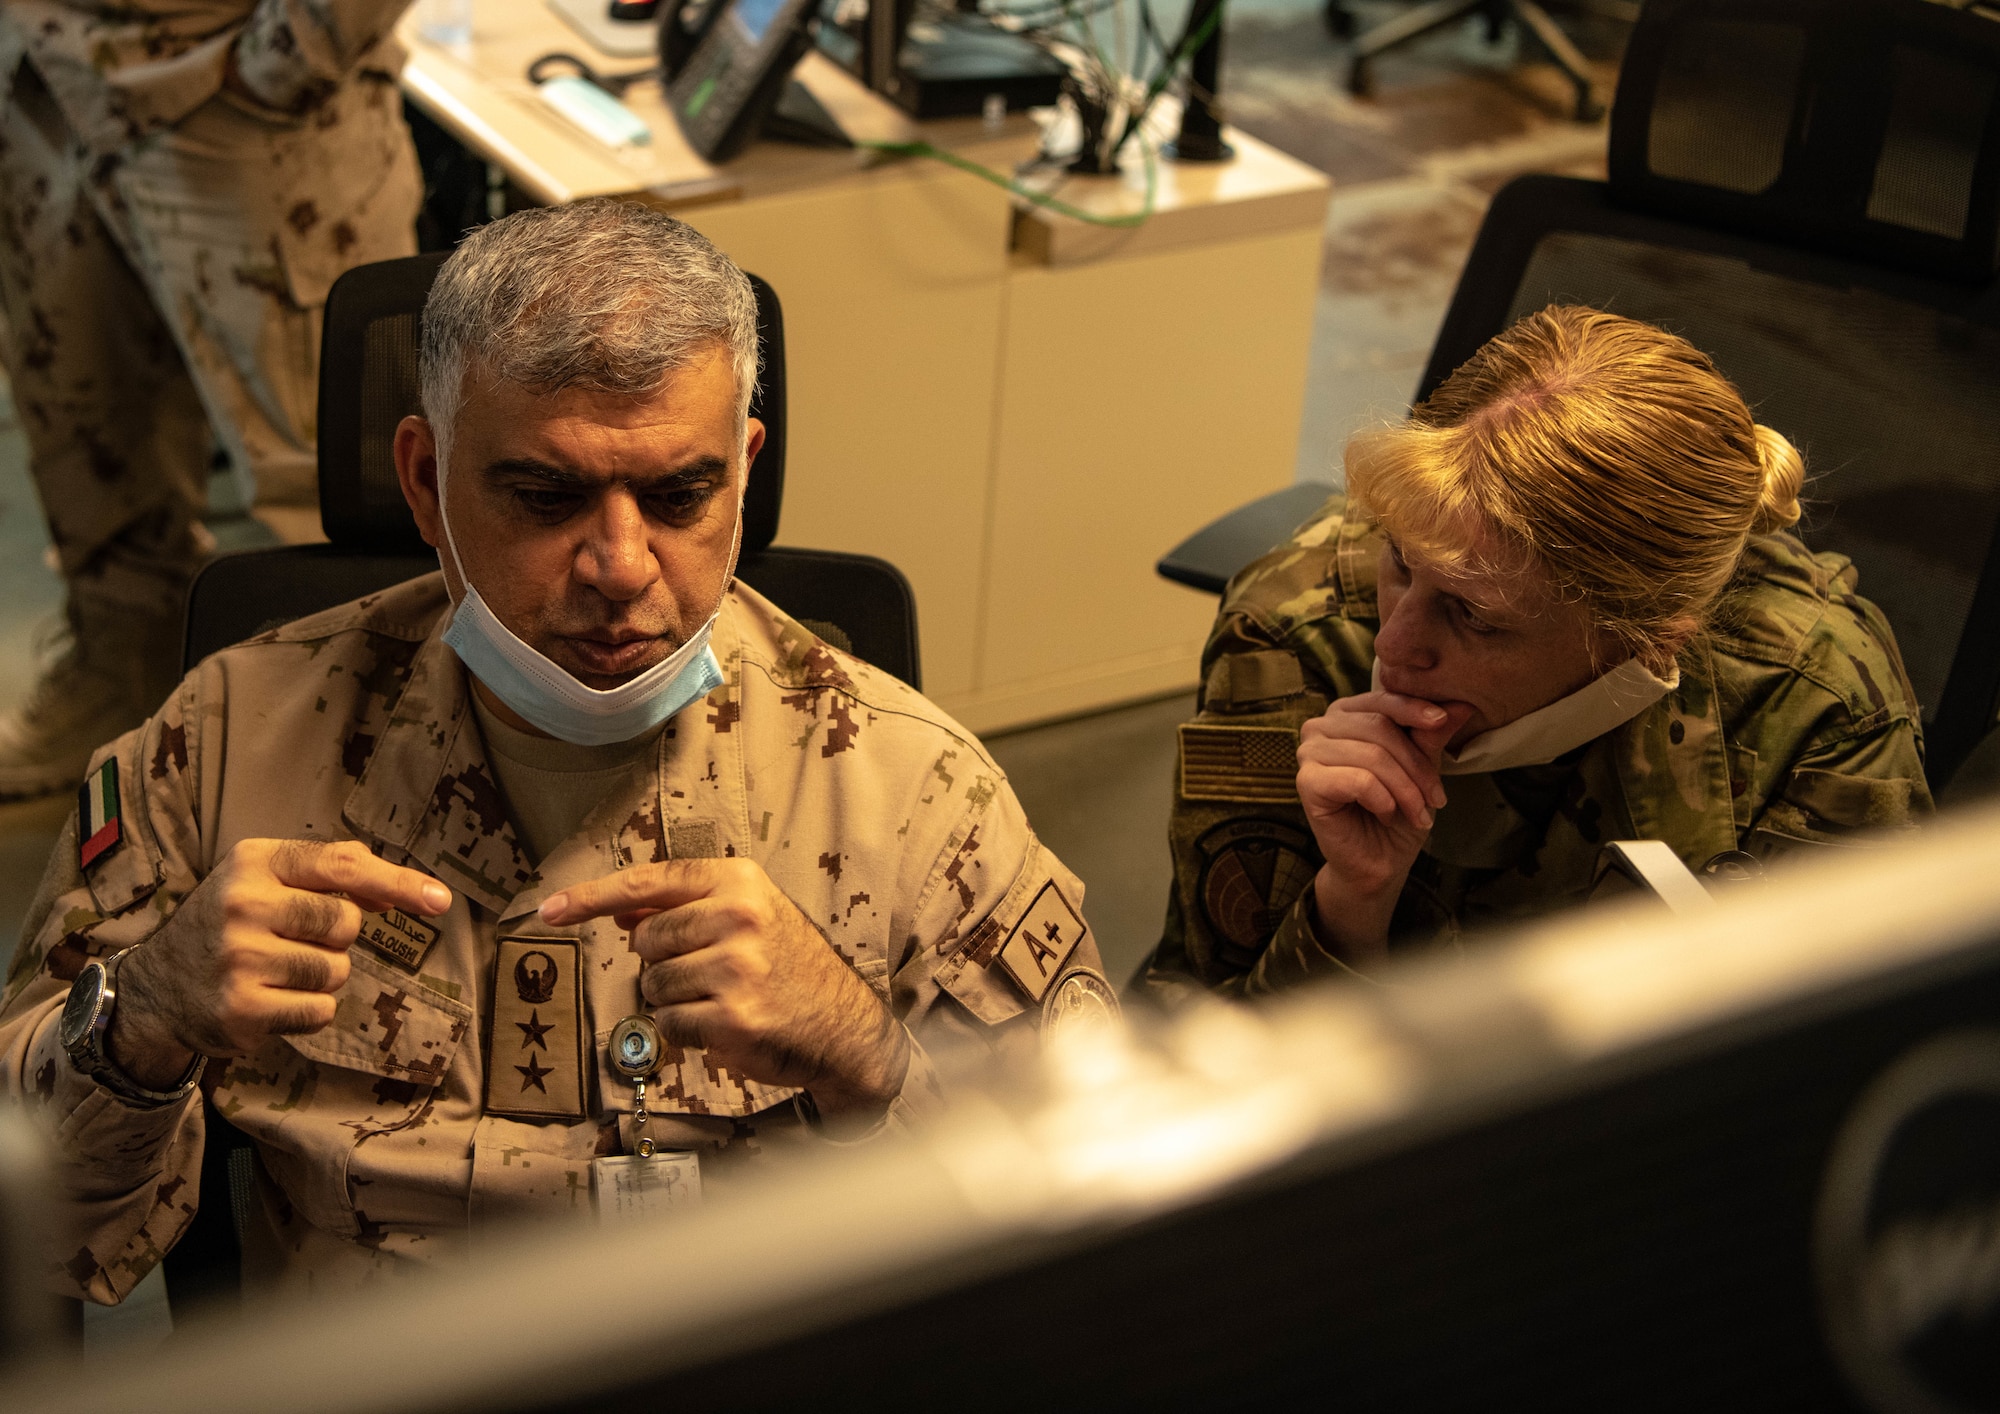 Col. Abdallah Ali Mohamed Al-Bloushi, United Arab Emirates Air Operations Center deputy commander, discuss operations with Col. Kristen Thompson, 380th Expeditionary Operations Group commander, during a visit to the 727th Expeditionary Air Control Squadron headquarters (Kingpin), August 24, 2020, in Al Dhafra Air Base, United Arab Emirates.